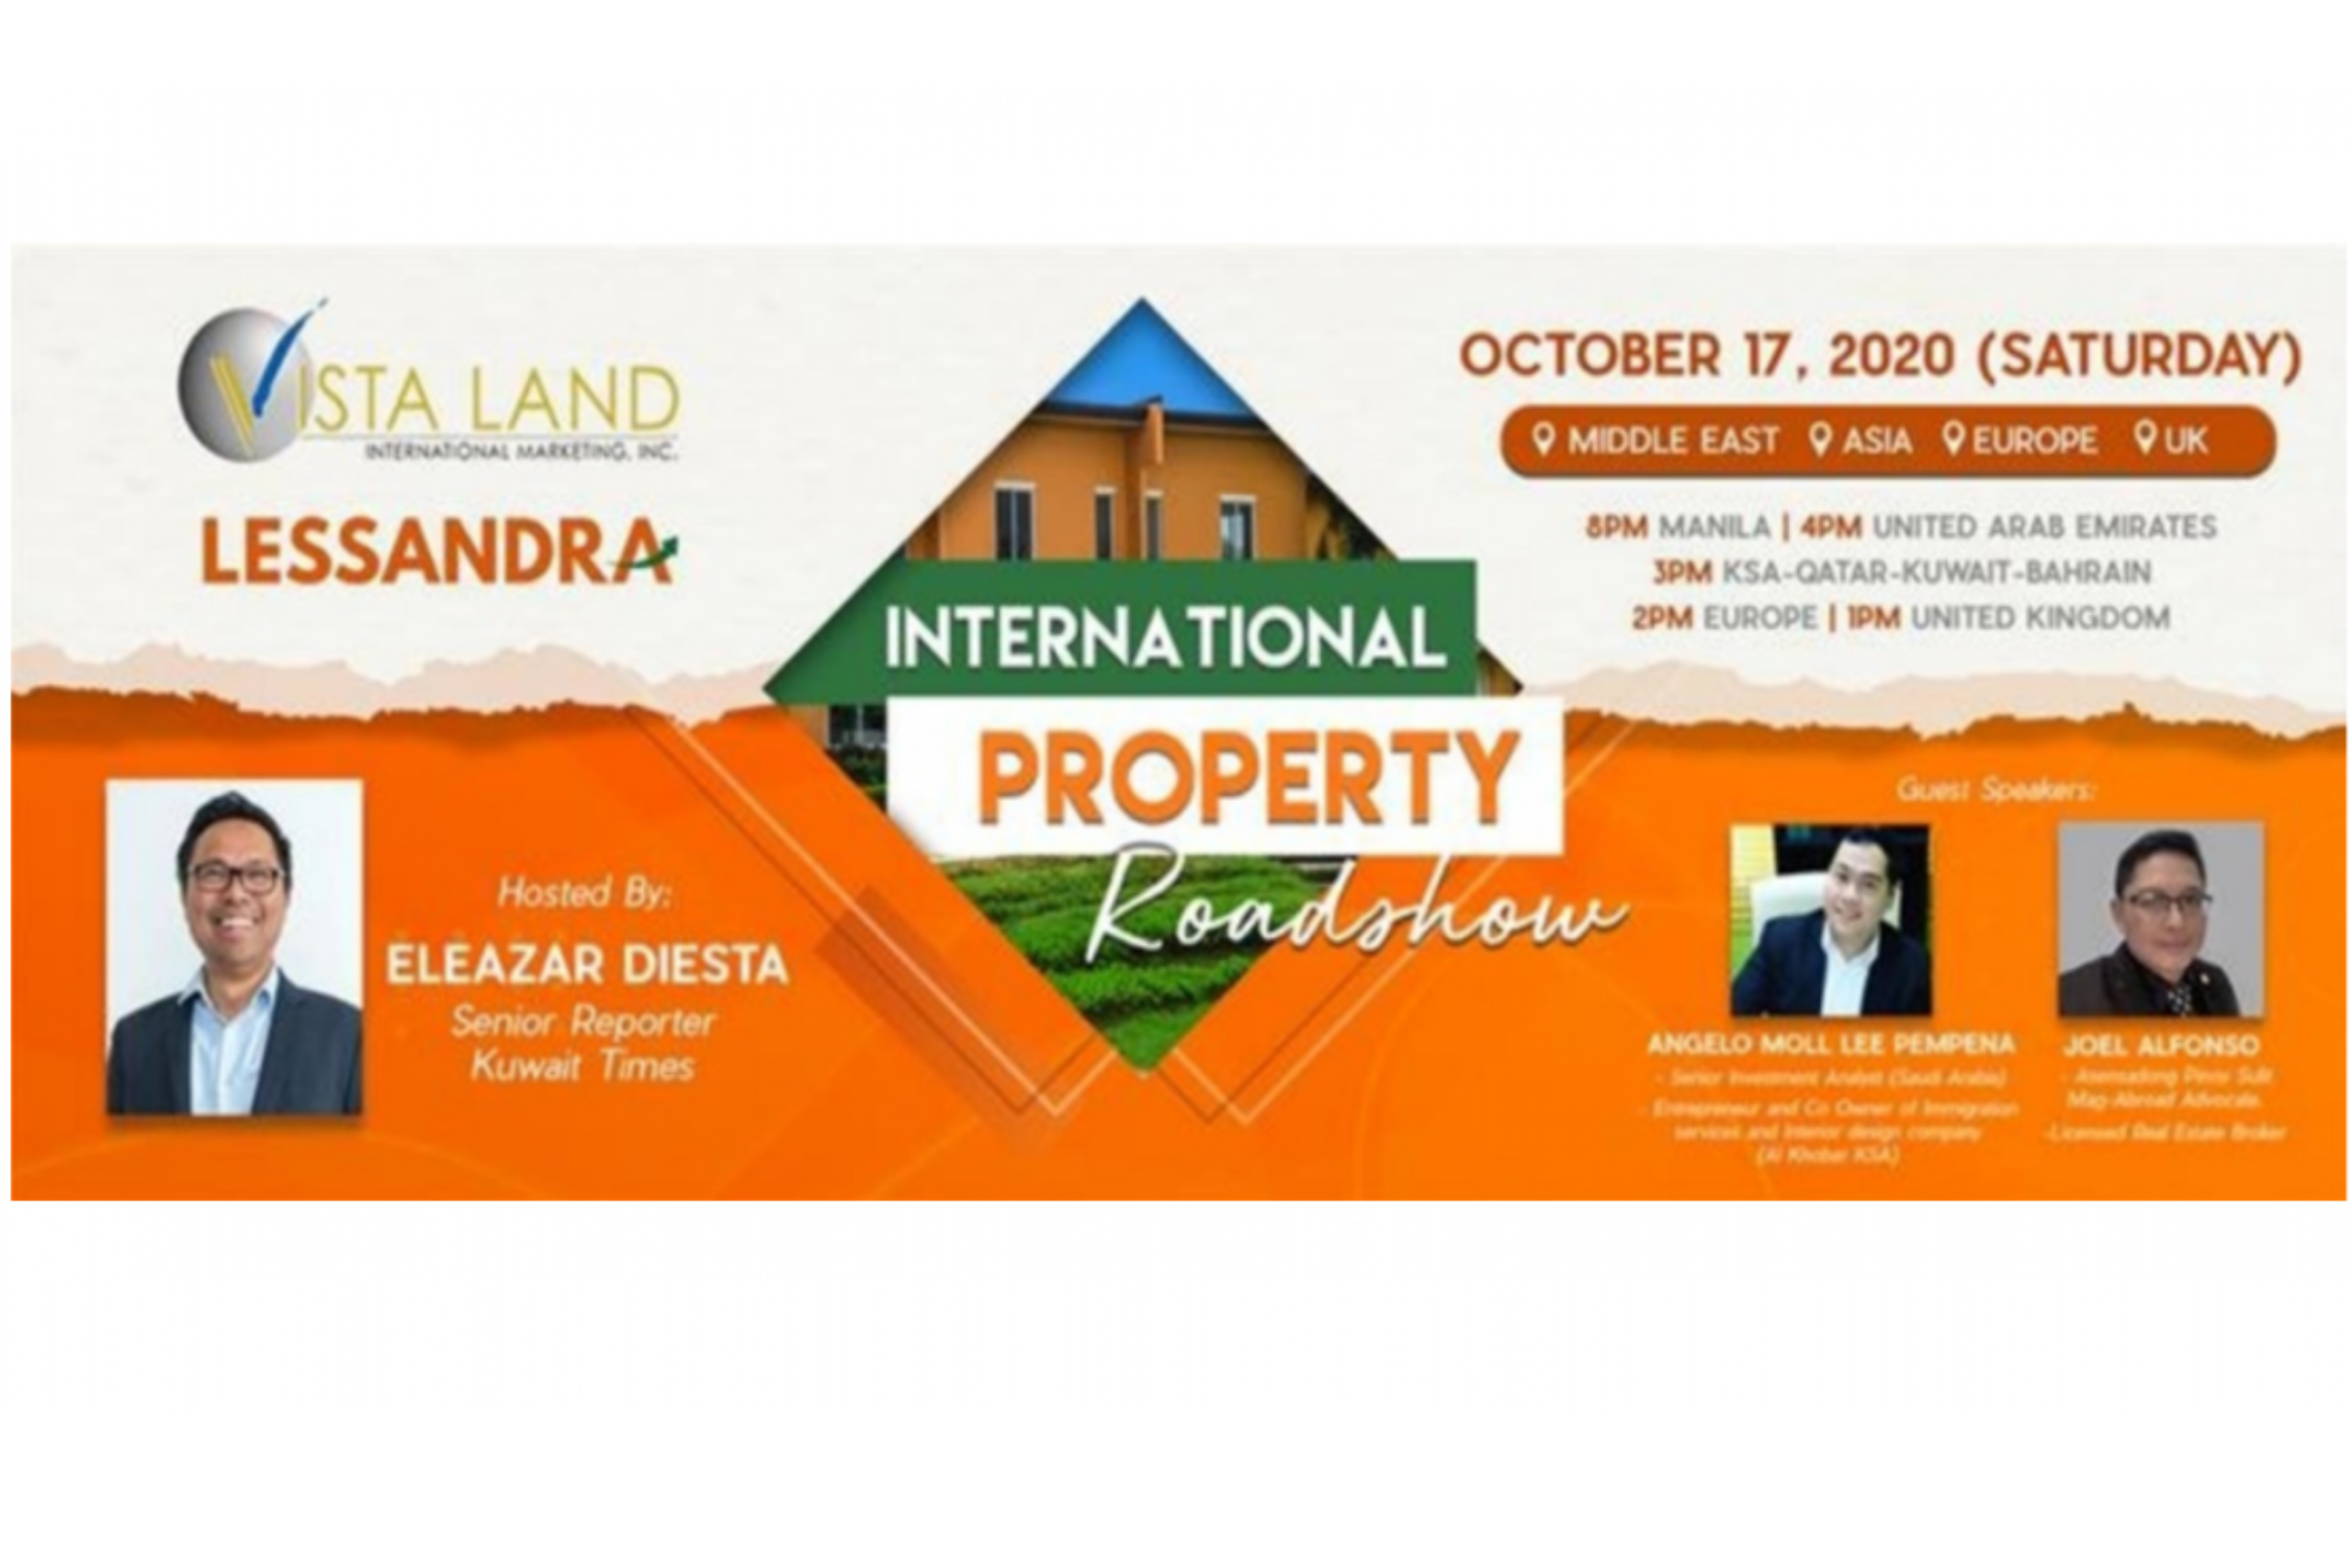 International Condo Property Roadshow, house and lot Philippines